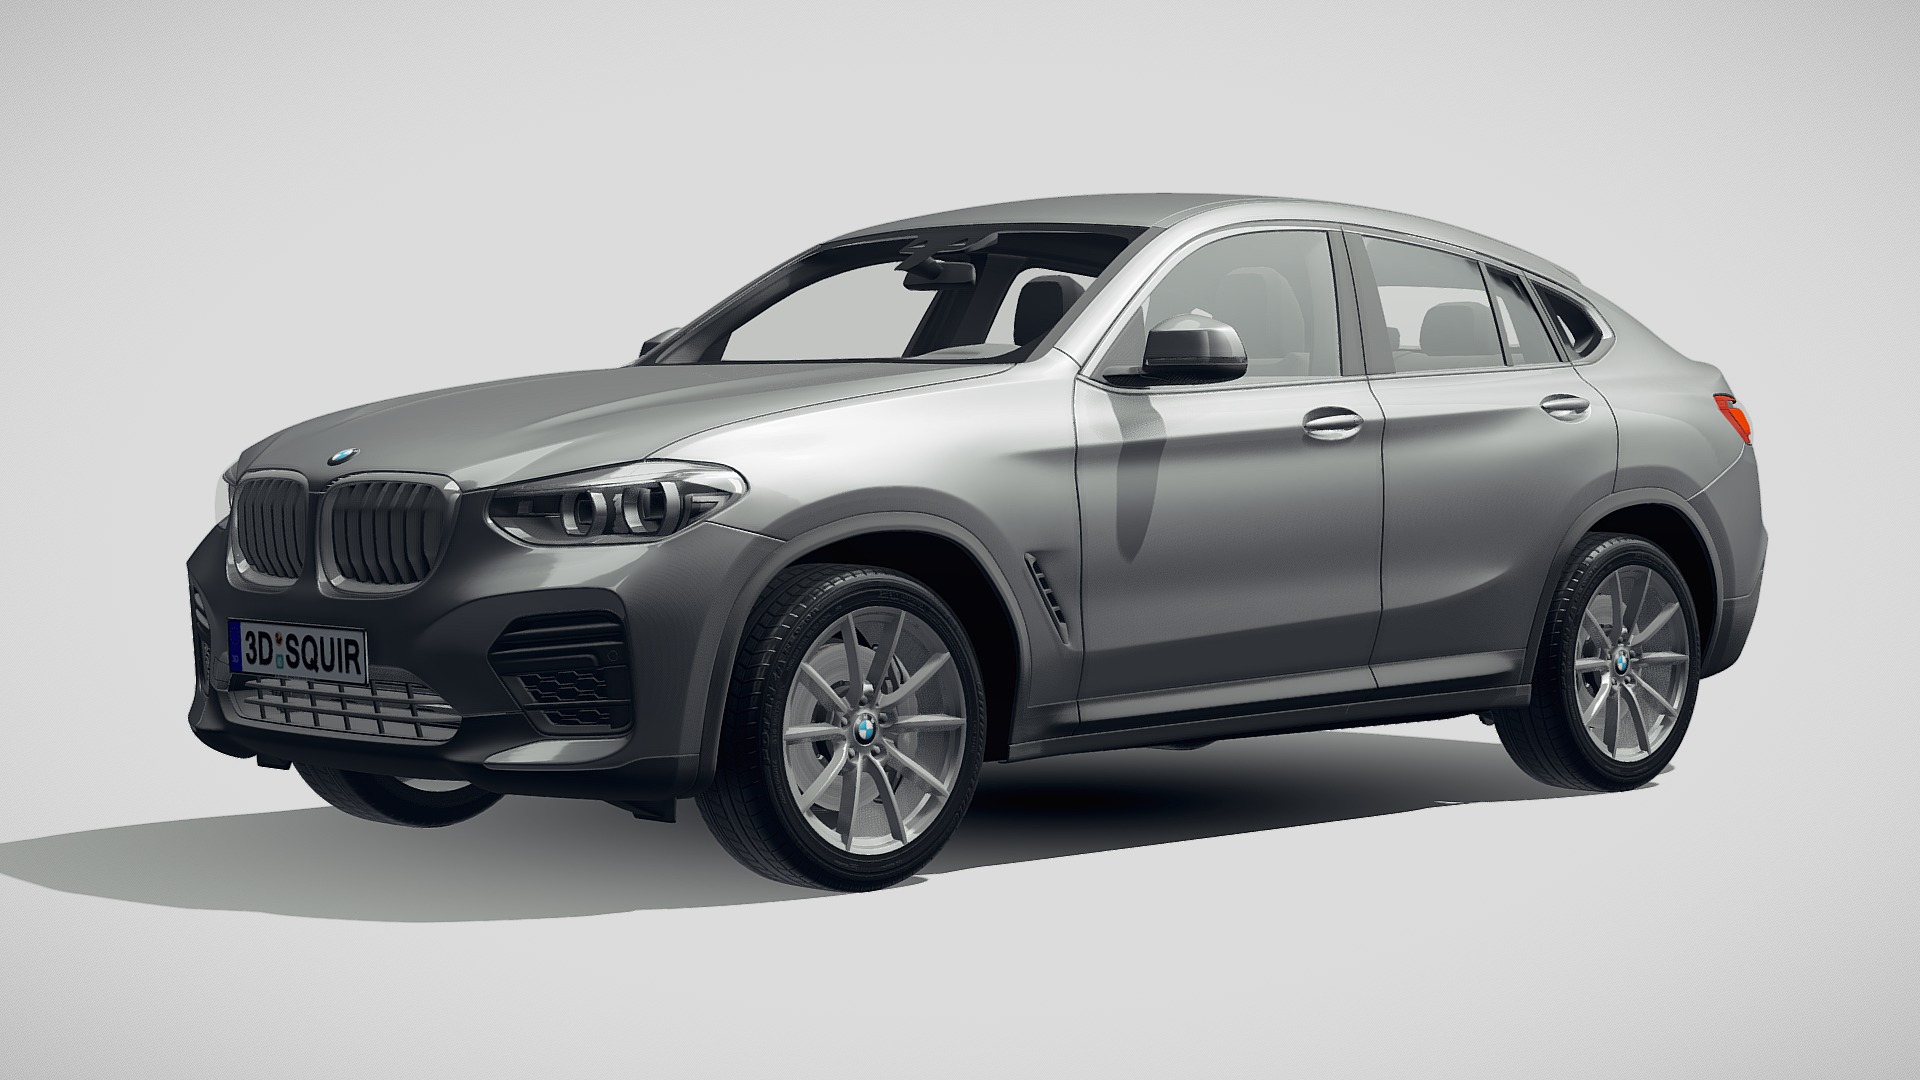 3D model BMW X4 base 2019 - This is a 3D model of the BMW X4 base 2019. The 3D model is about a silver car with a black top.